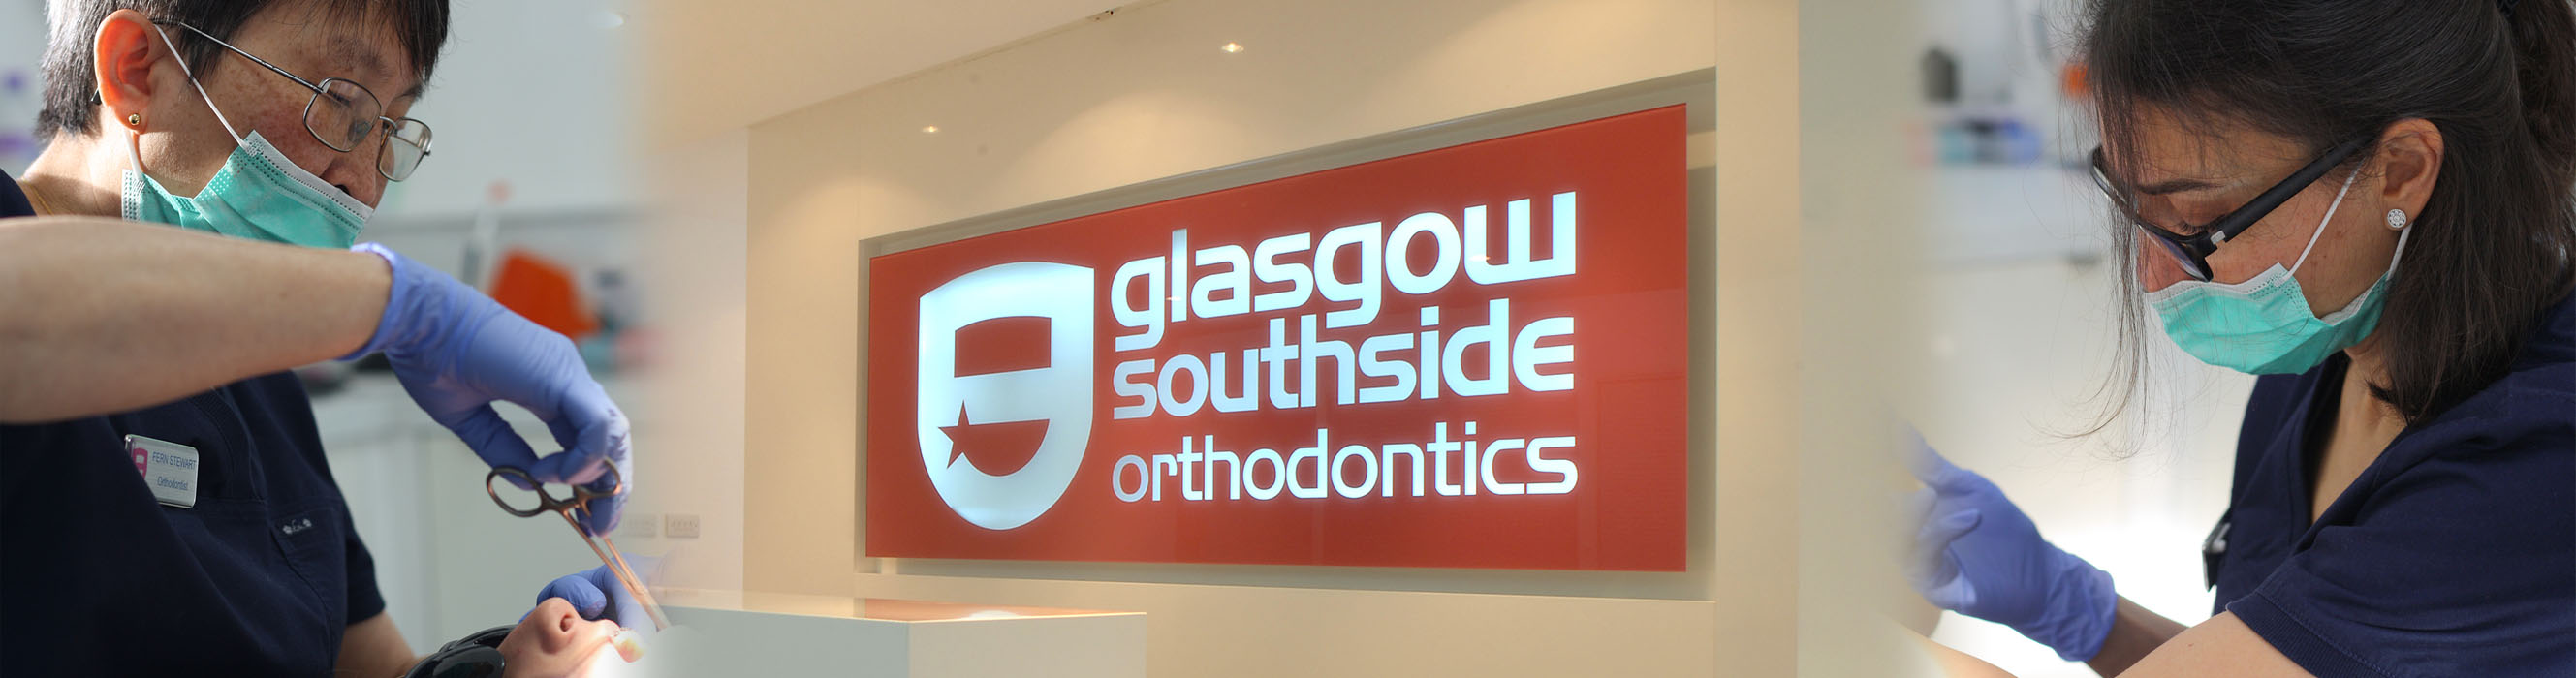 Welcome to Glasgow Southside Orthodontics